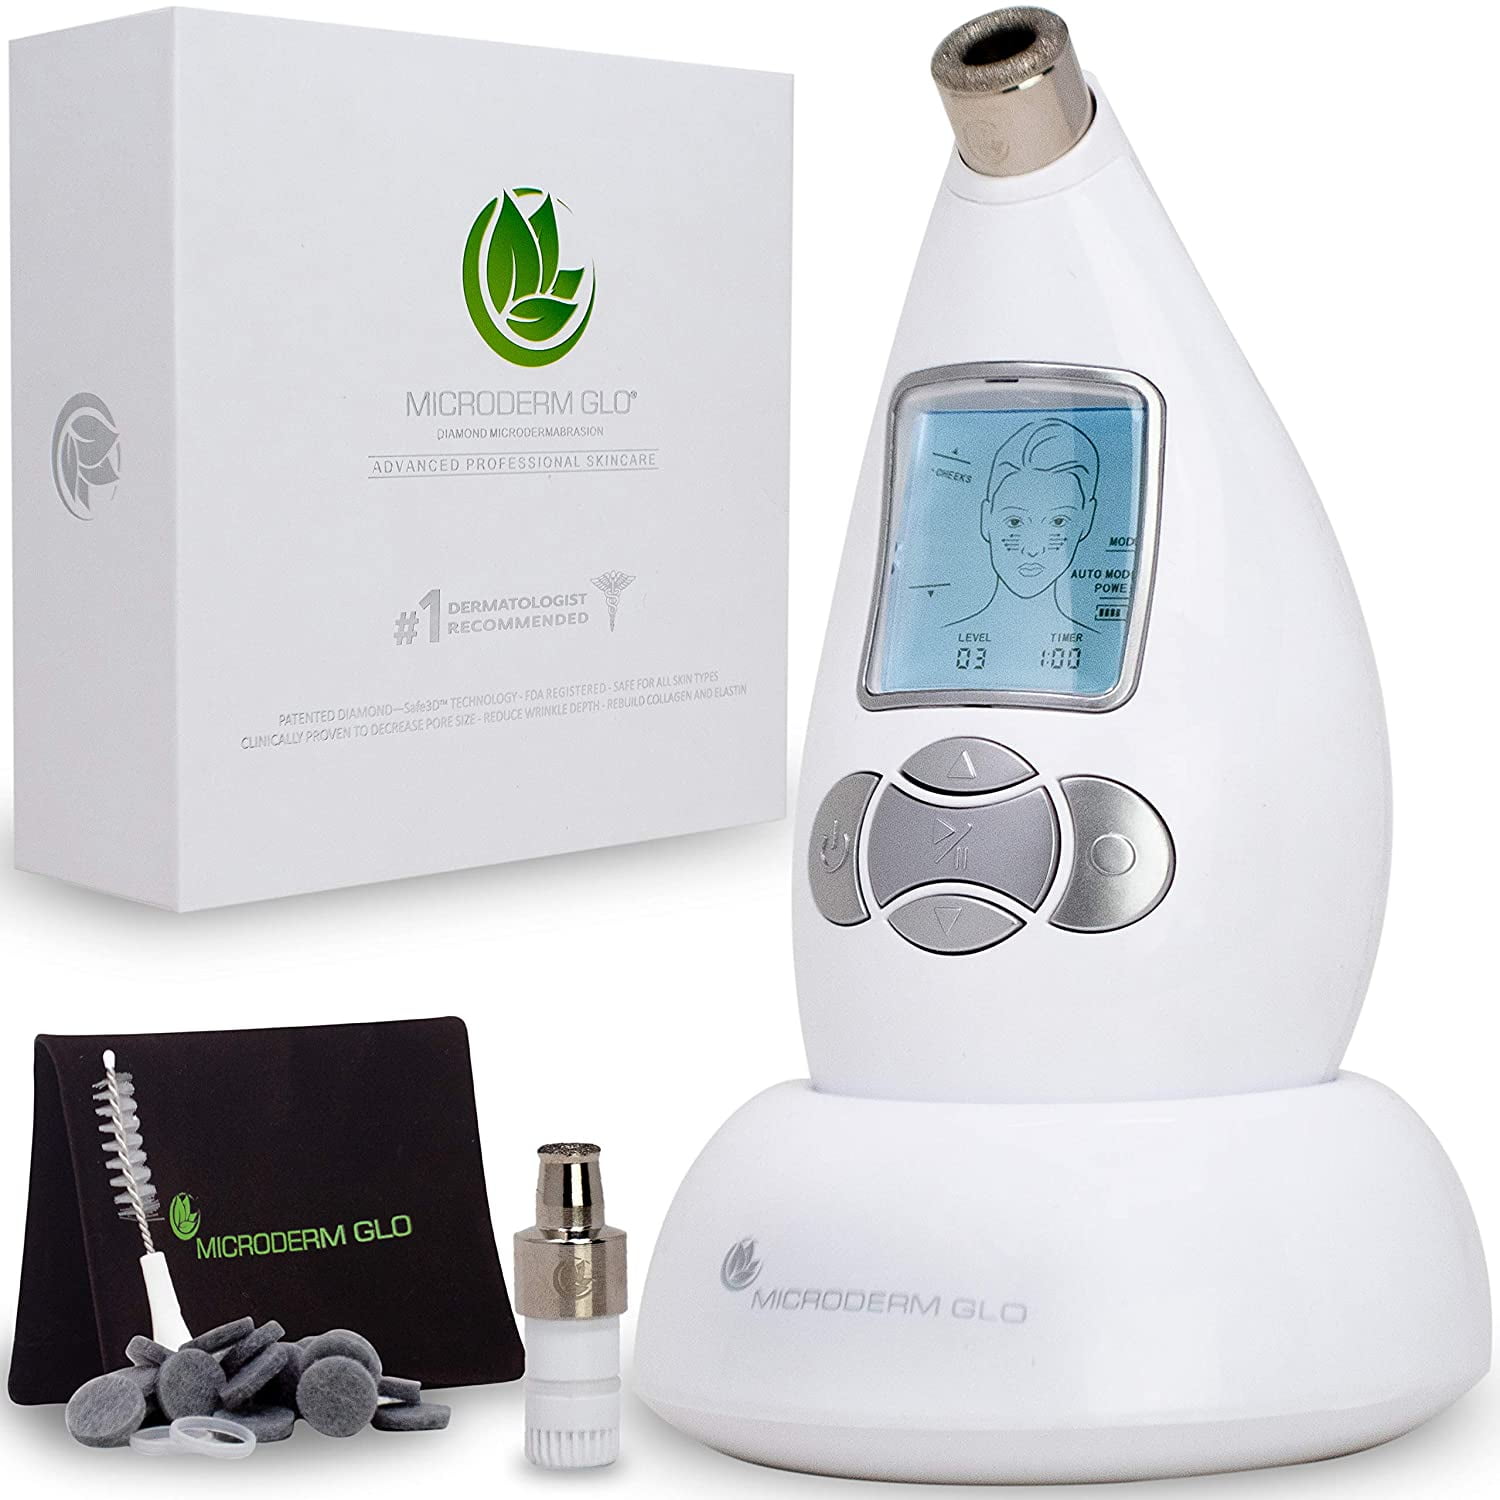 DERMA TOUCH MICRODERMABRASION MACHINE FOR PARTS 